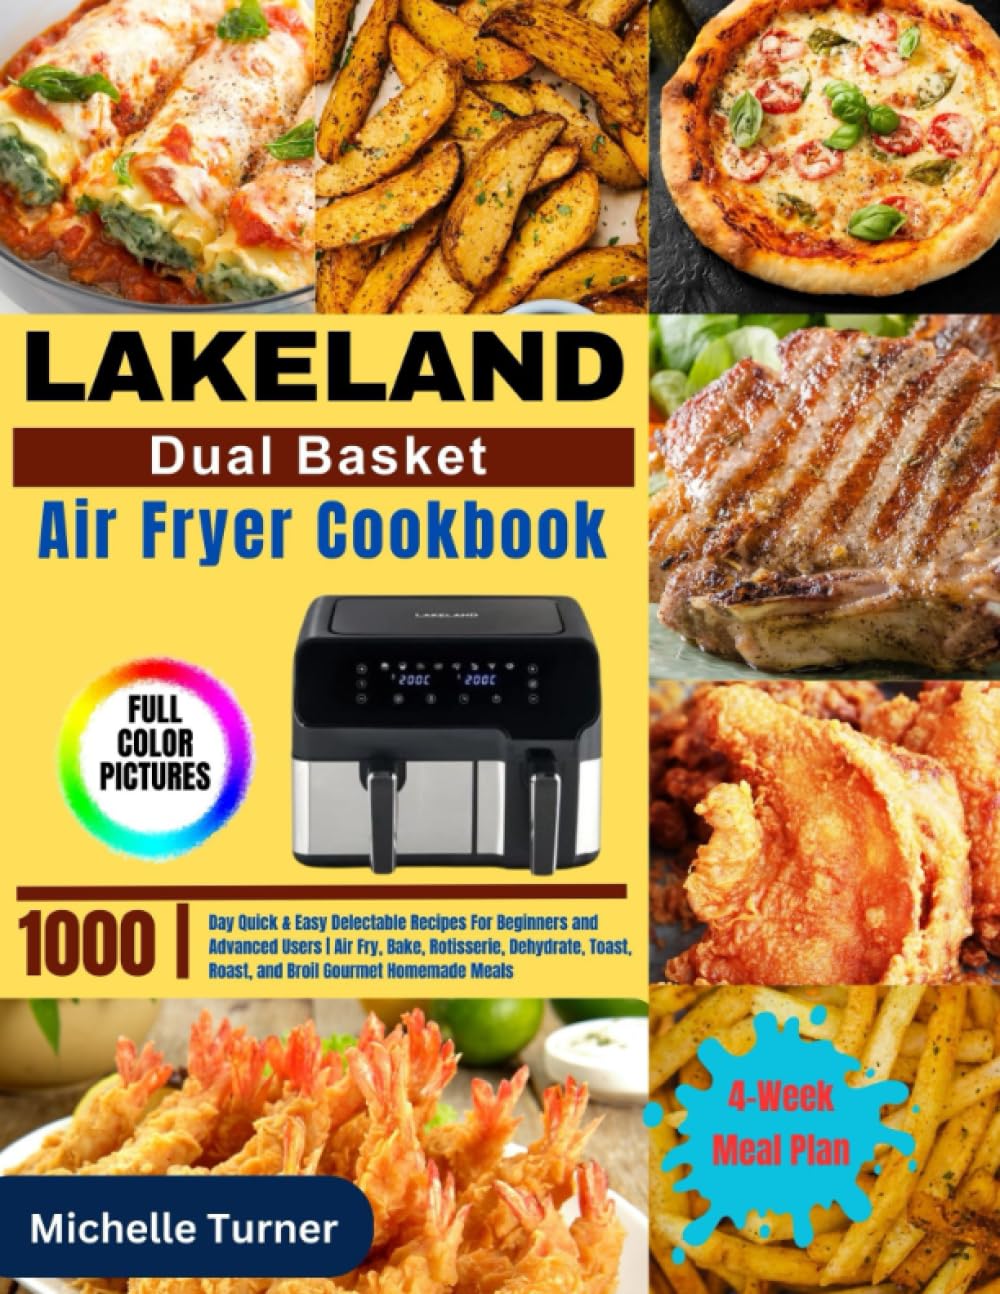 Lakeland Dual Basket Air Fryer Cookbook: 1000-Day Quick  Easy Delectable Recipes For Beginners and Advanced Users | Air Fry, Bake, Rotisserie, ... Homemade Meals, including a 4-Week Meal Plan.     Paperback – 17 Aug. 2023